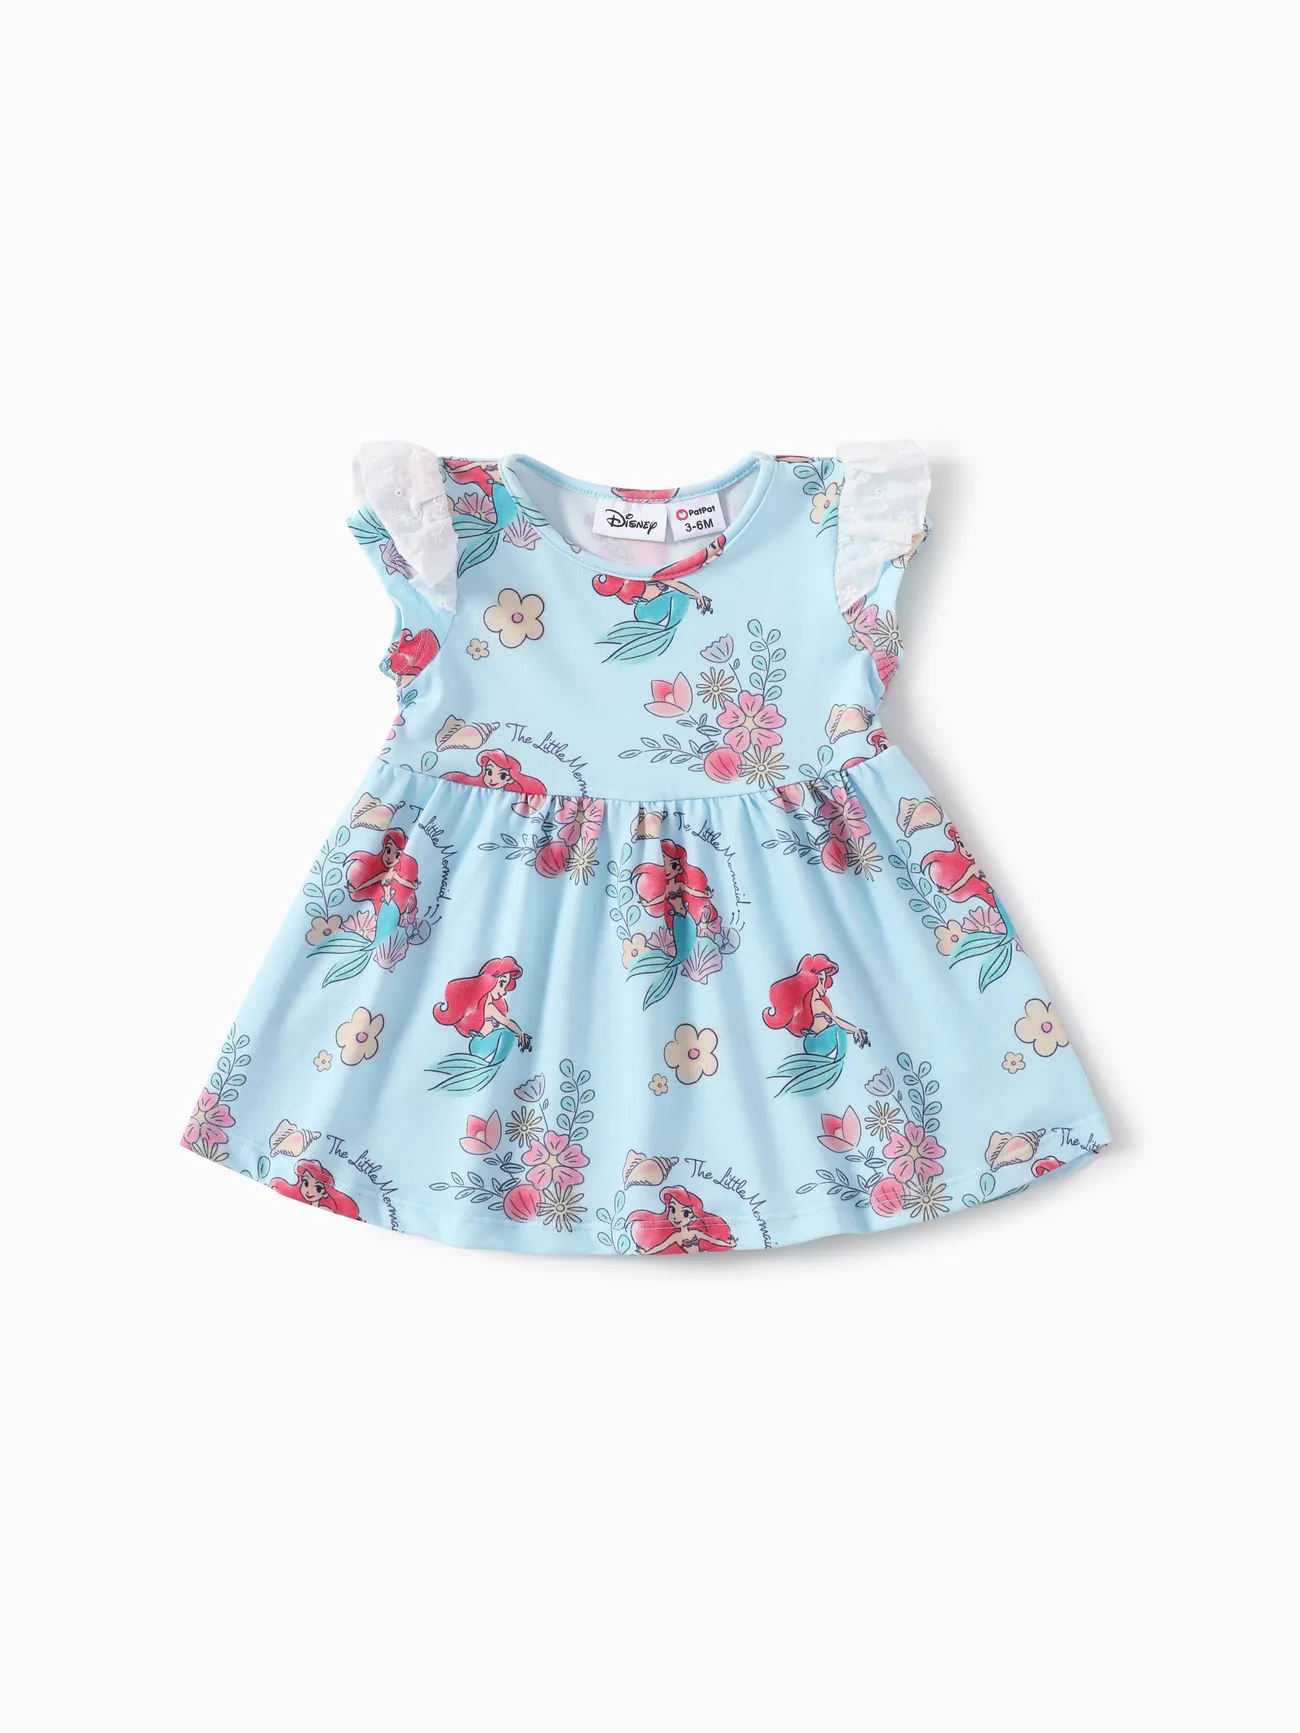 Disney Princess Baby/Toddler Girls Ariel/Belle/Snow White 1pc Naia™ Character All-over Print Lace Ruffled-sleeve Dress Blue big image 1